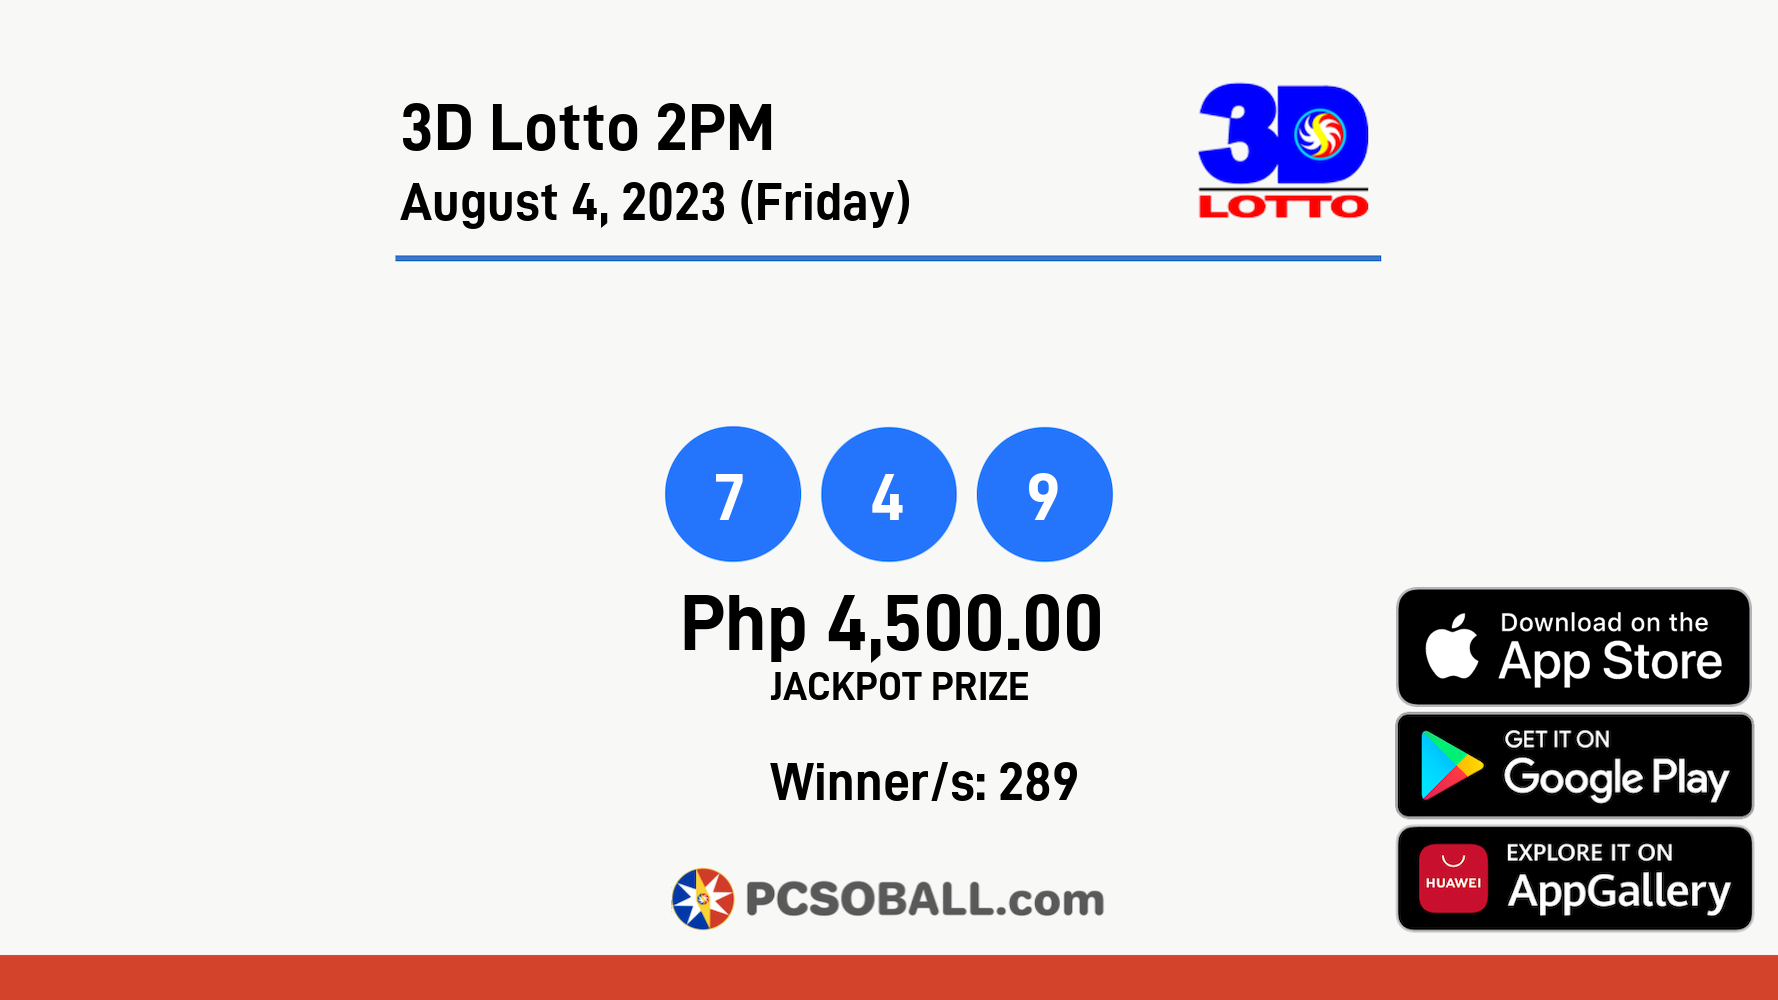 3D Lotto 2PM August 4, 2023 (Friday) Result